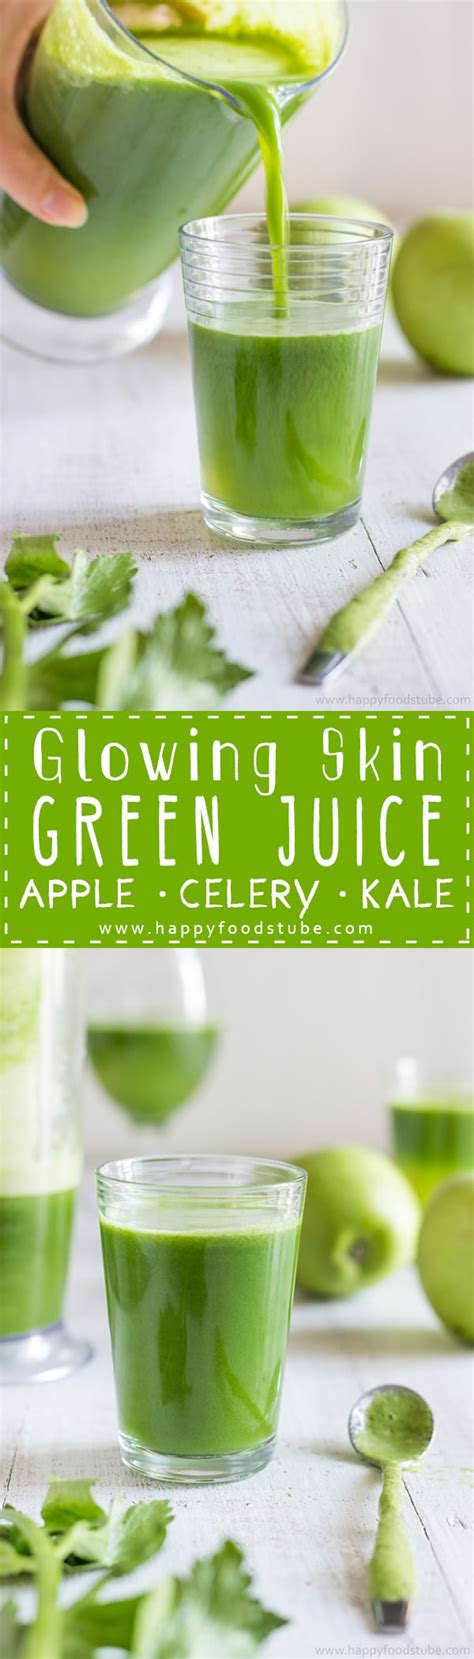 By adding just 1 or 2 juices per day to a balanced diet, you will see substantial energy improvements. Glowing Skin Green Juice Recipe - Happy Foods Tube